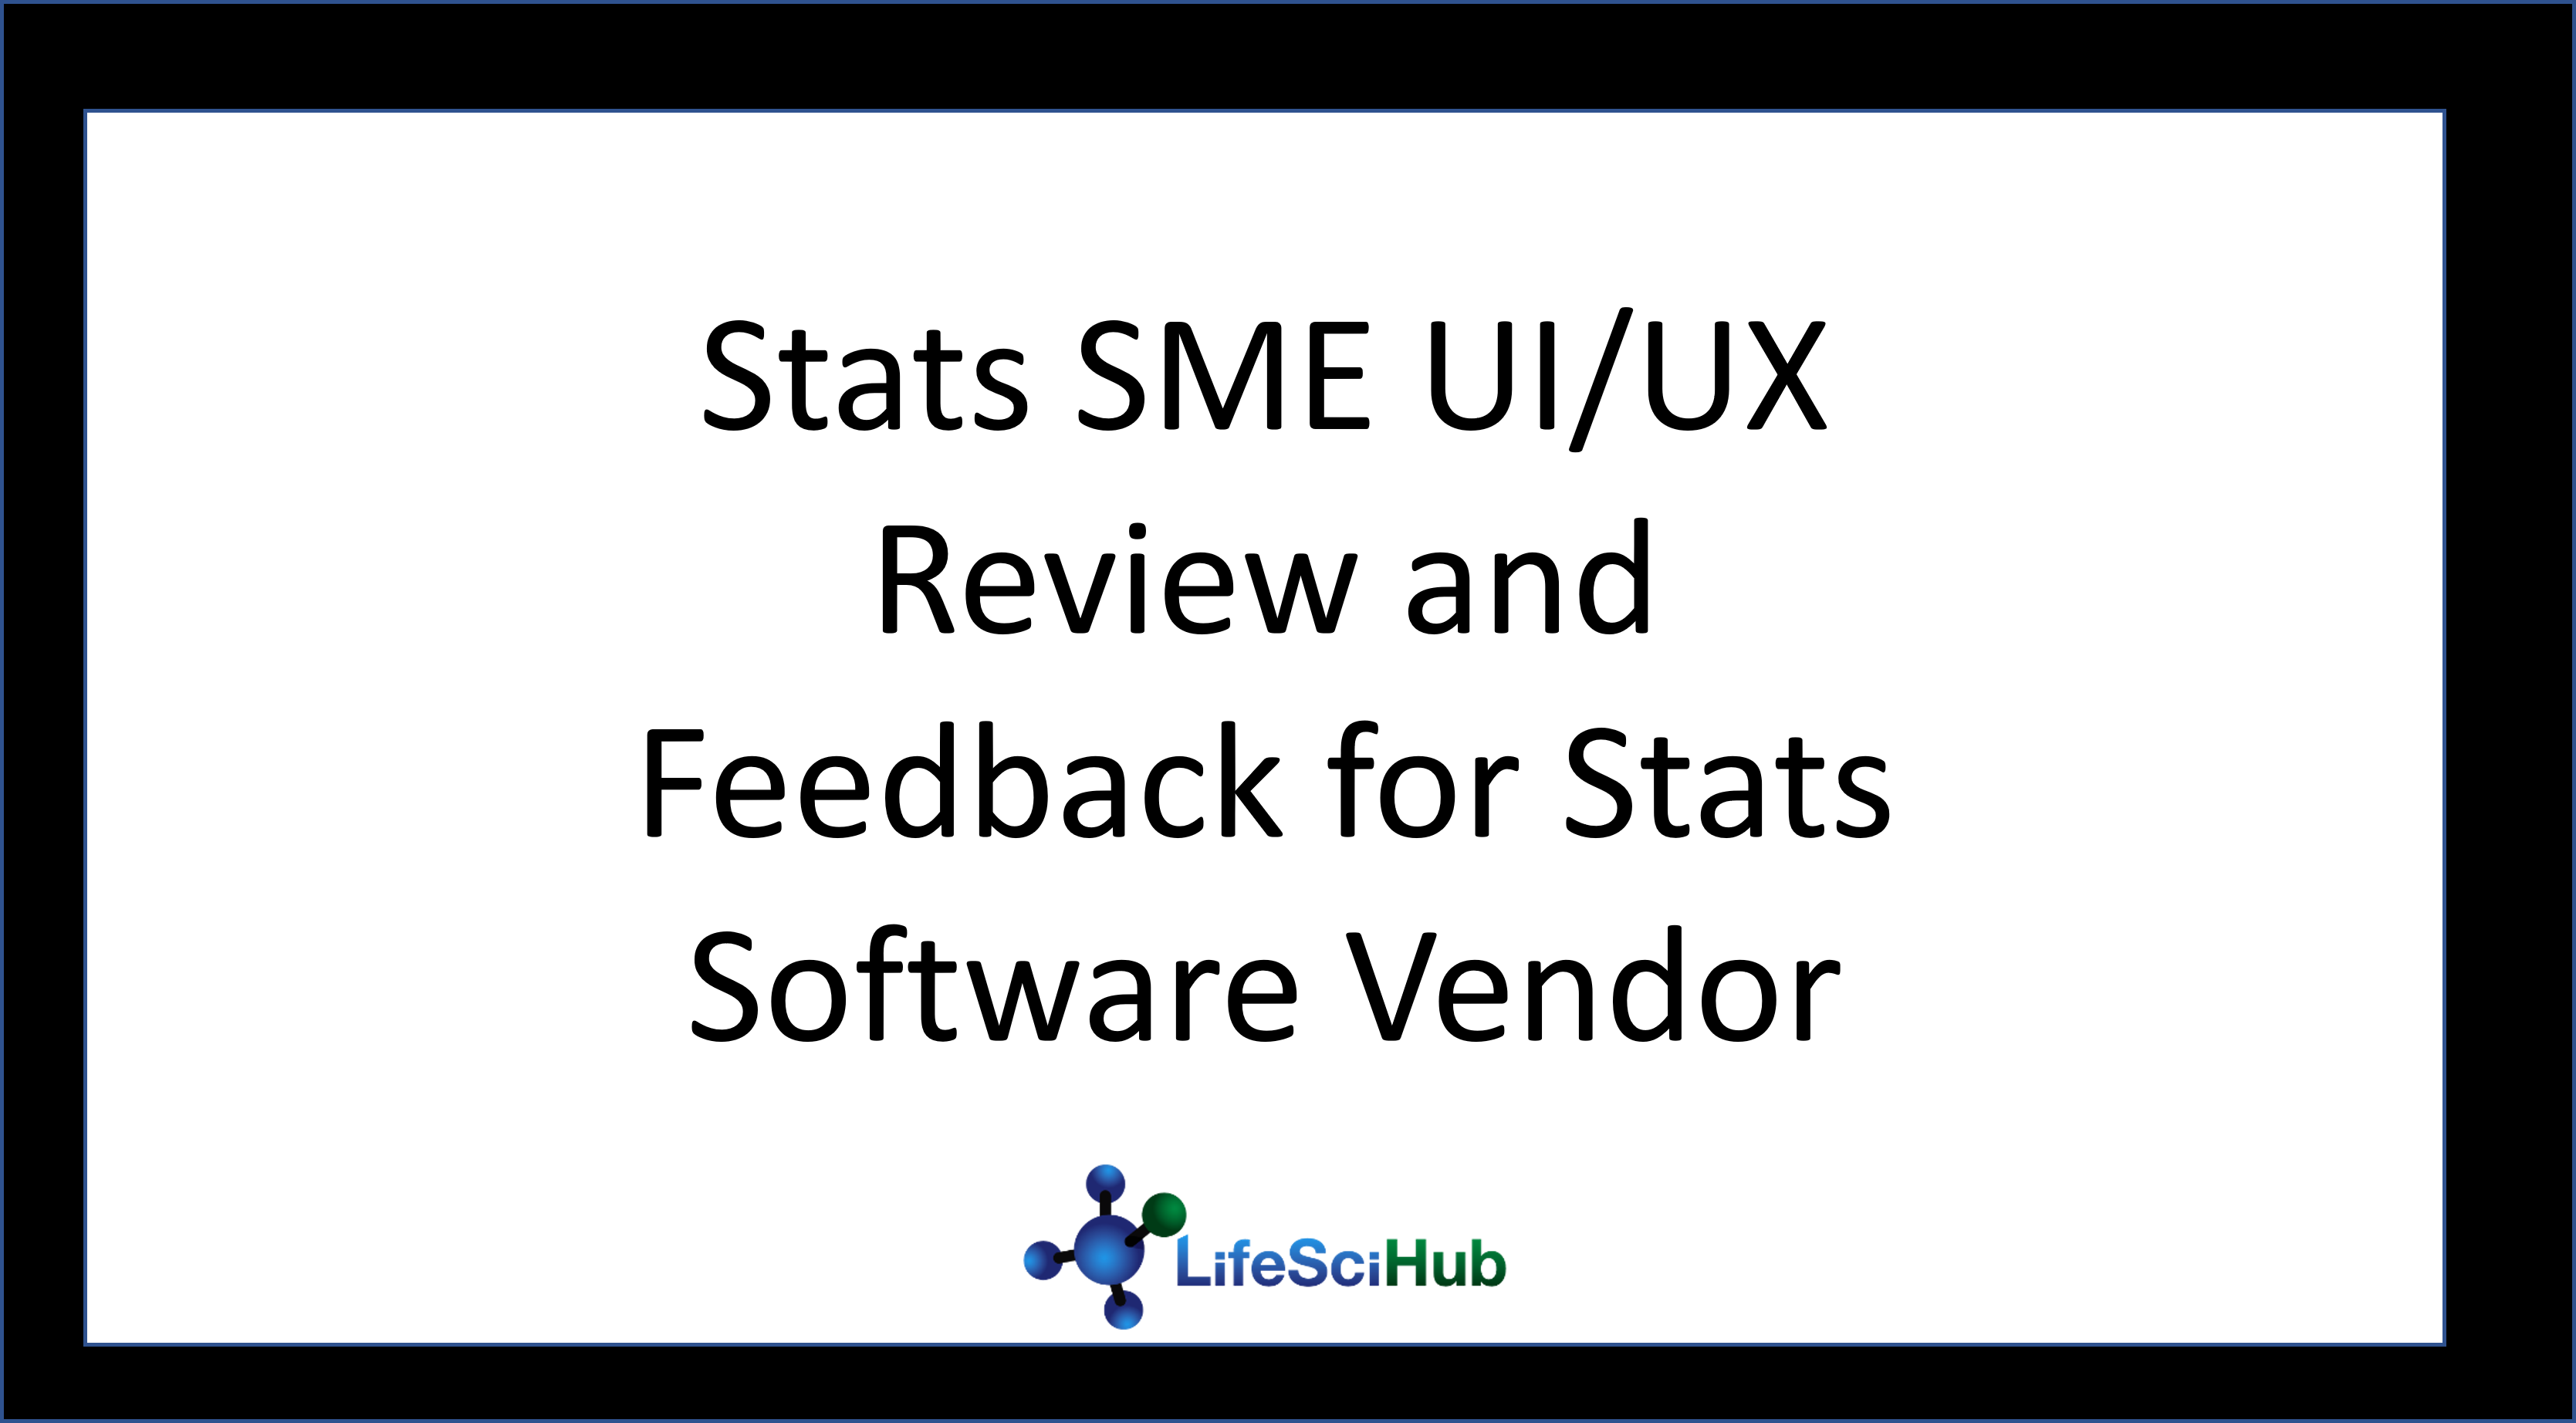 Stats SME UI/UX Review and Feedback for Stats Software Vendor